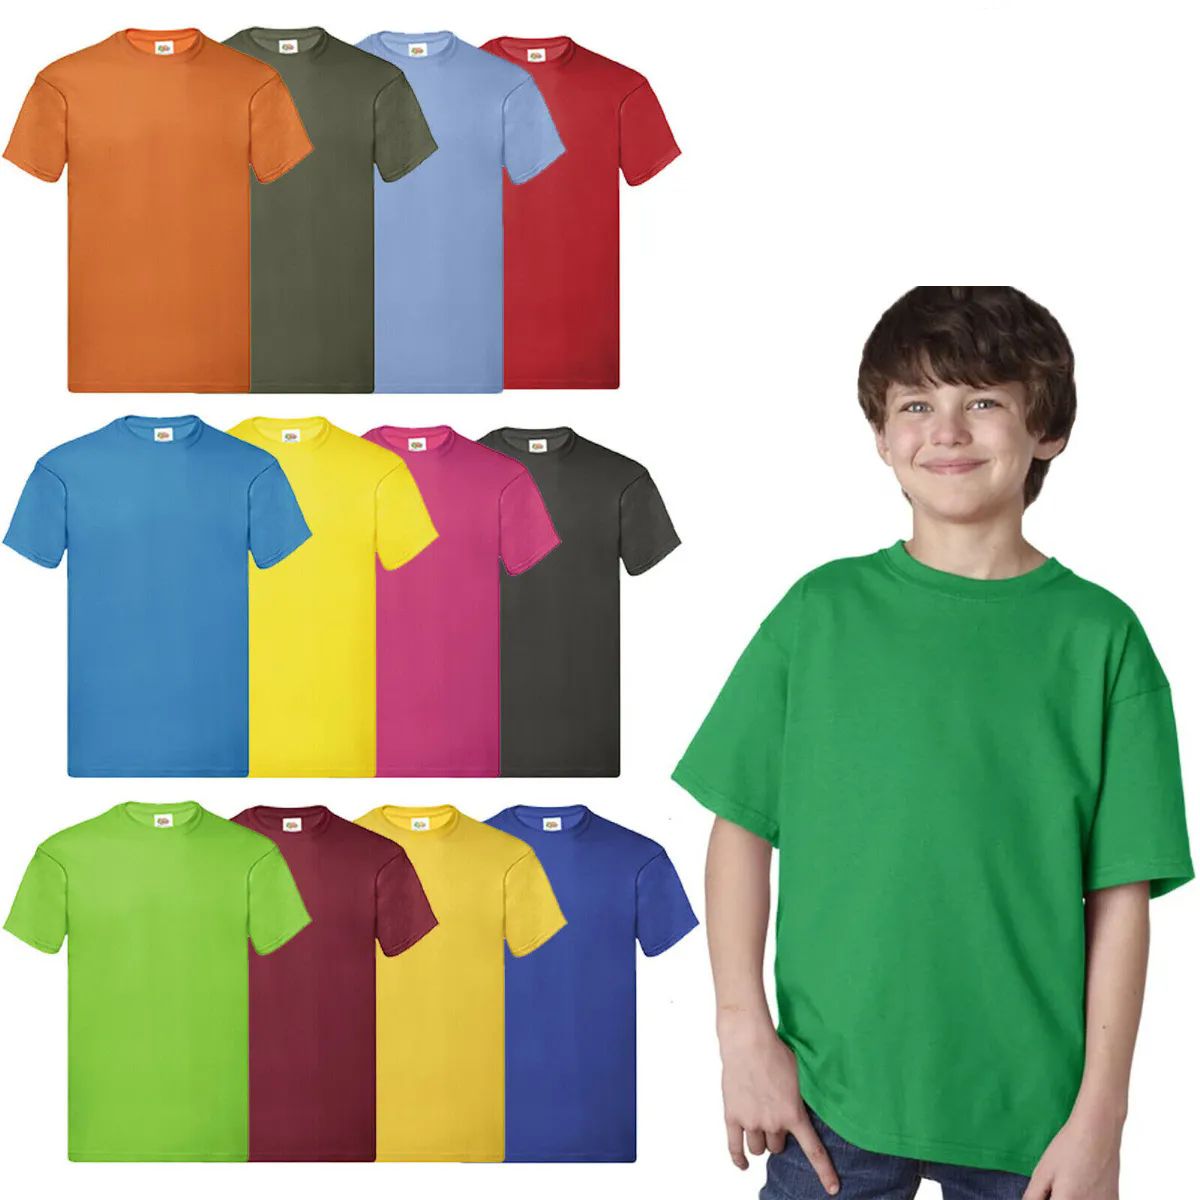 12 Pieces of Billionhats Kids Youth Cotton Assorted Colors T-Shirts Size Small